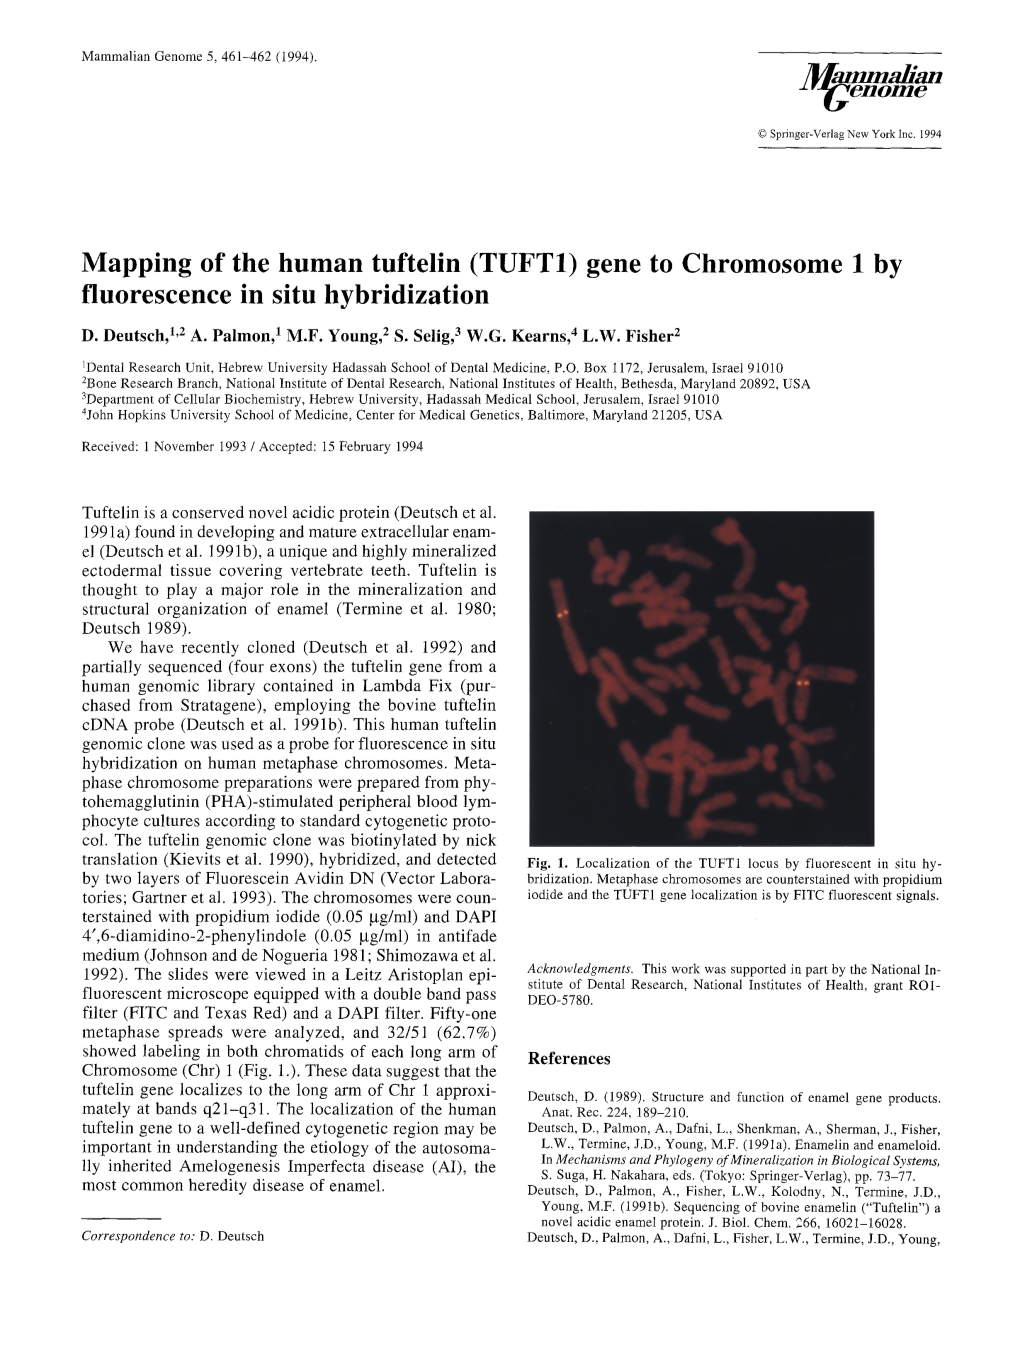 Mapping of the Human Tuftelin (TUFT1) Gene to Chromosome 1 by Fluorescence in Situ Hybridization